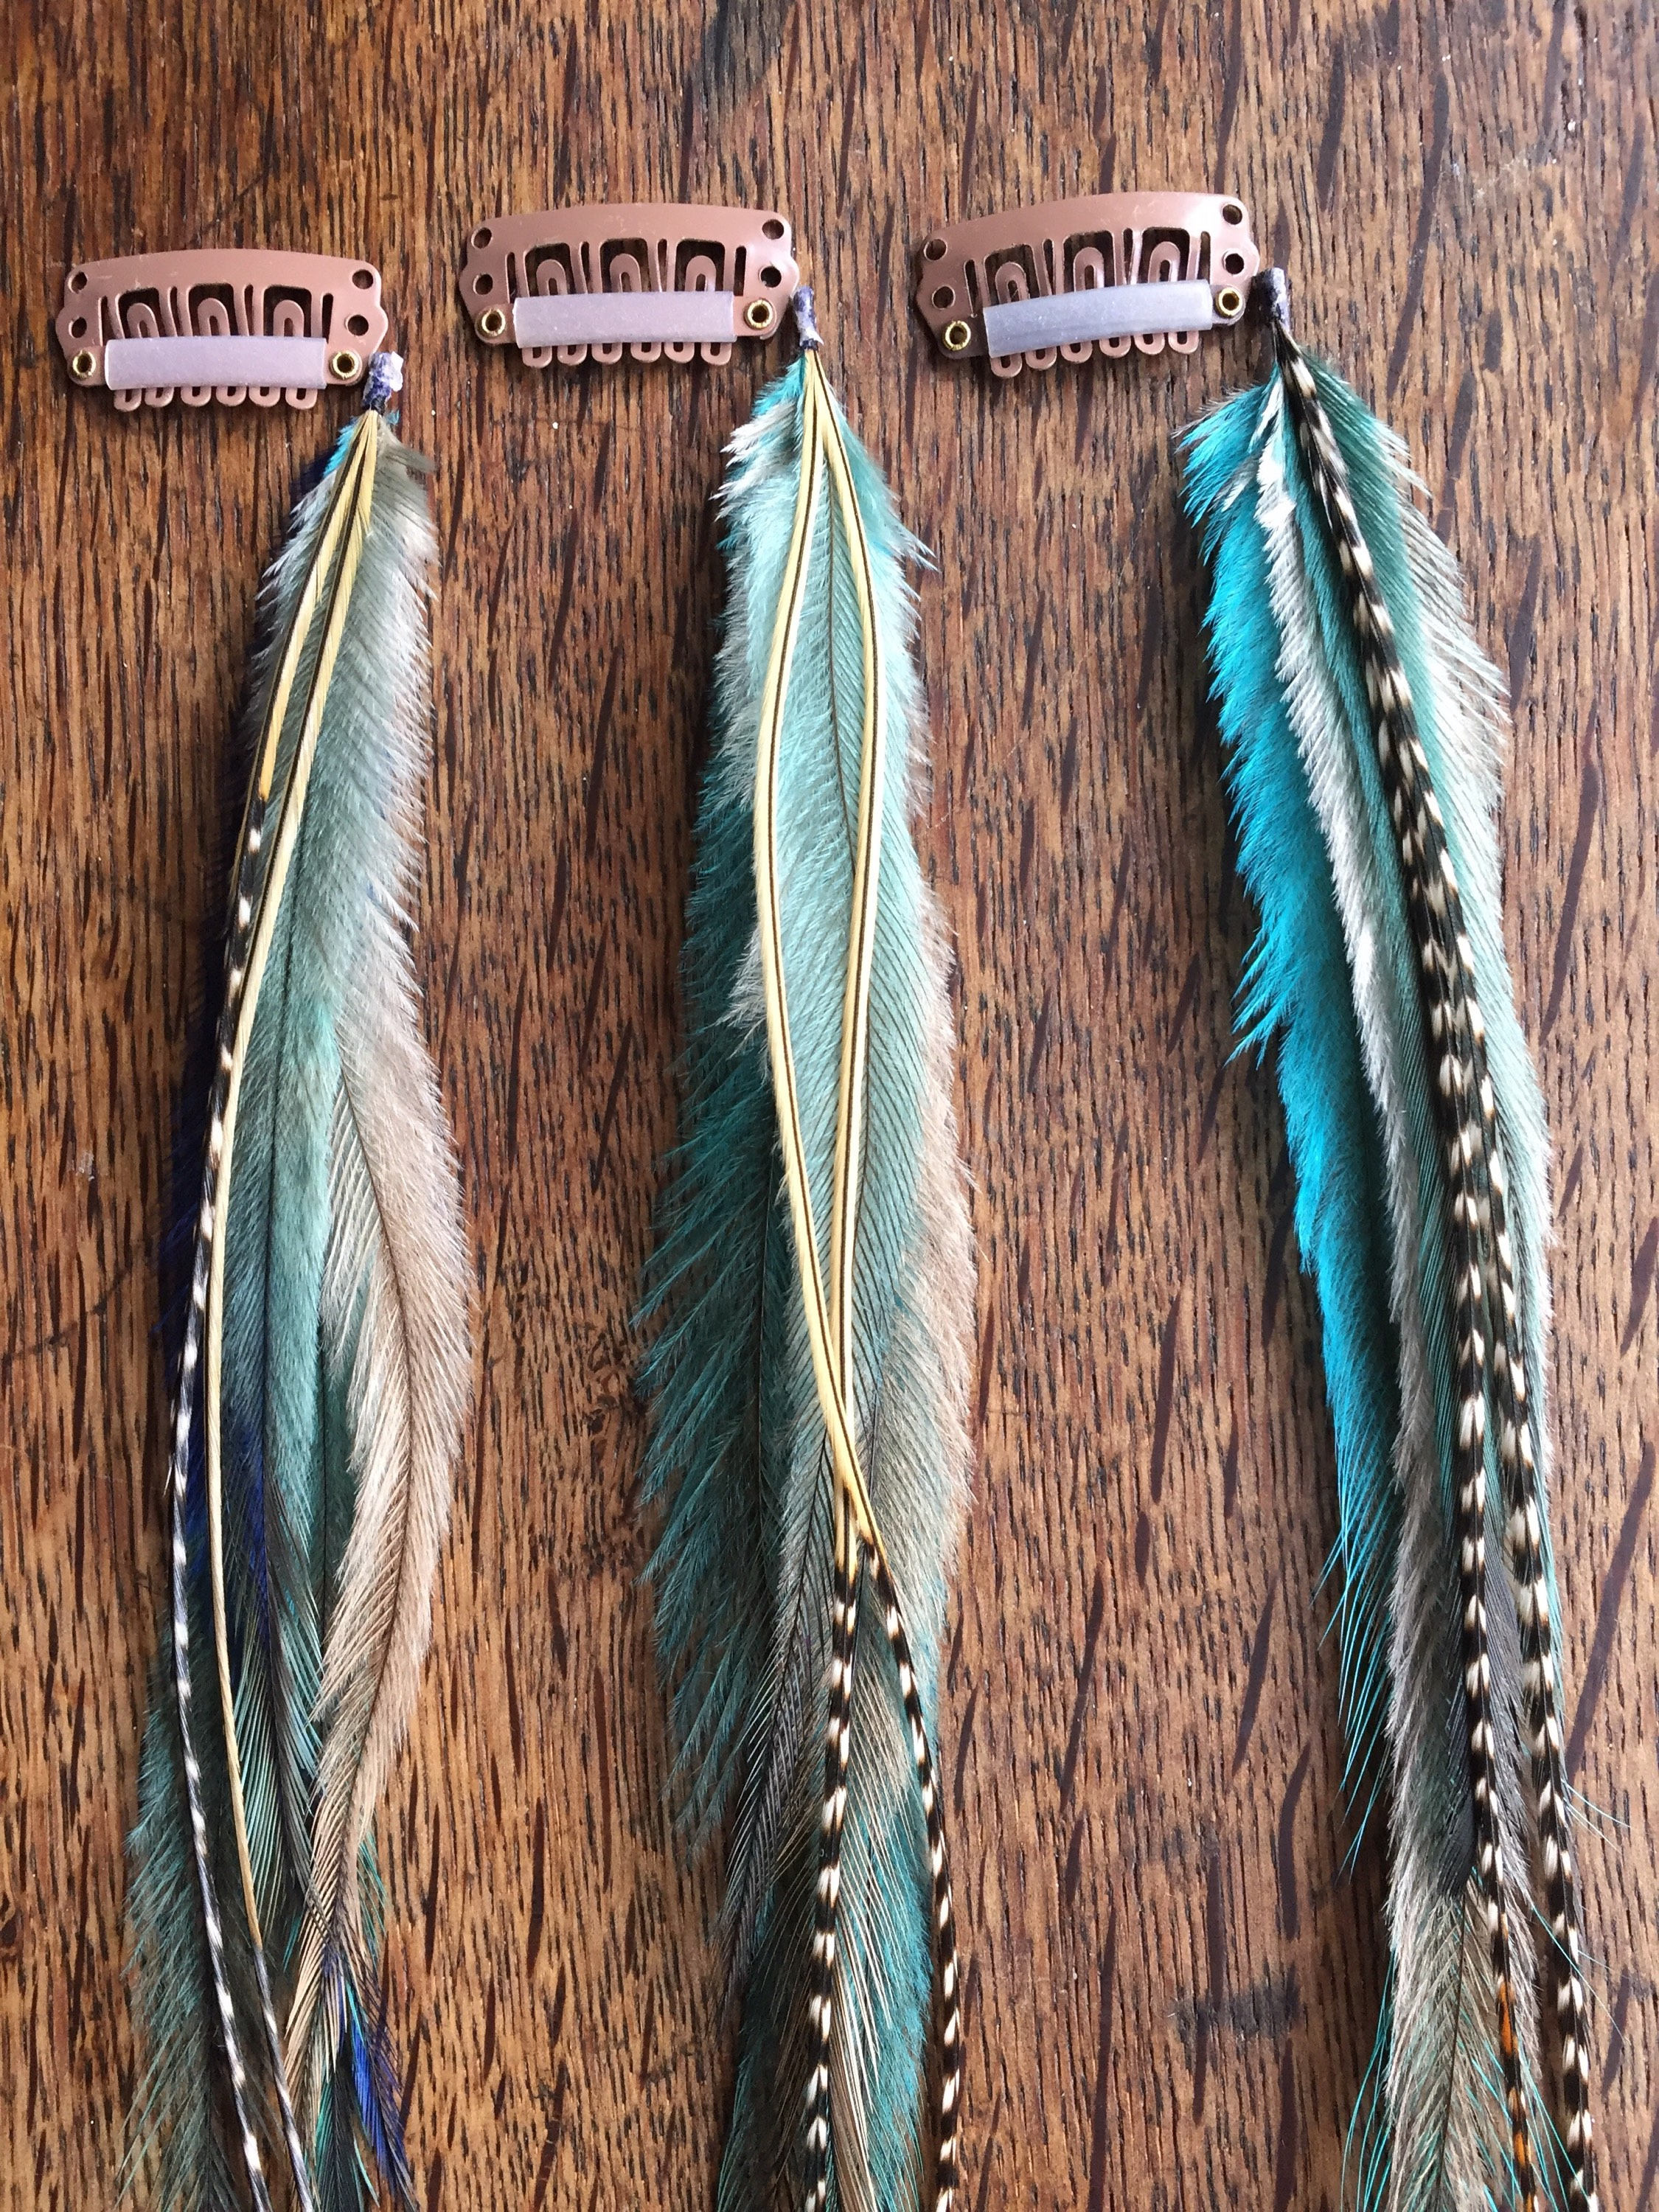 Hair Feather Extensions & Feather Earrings – The Feather Junkie